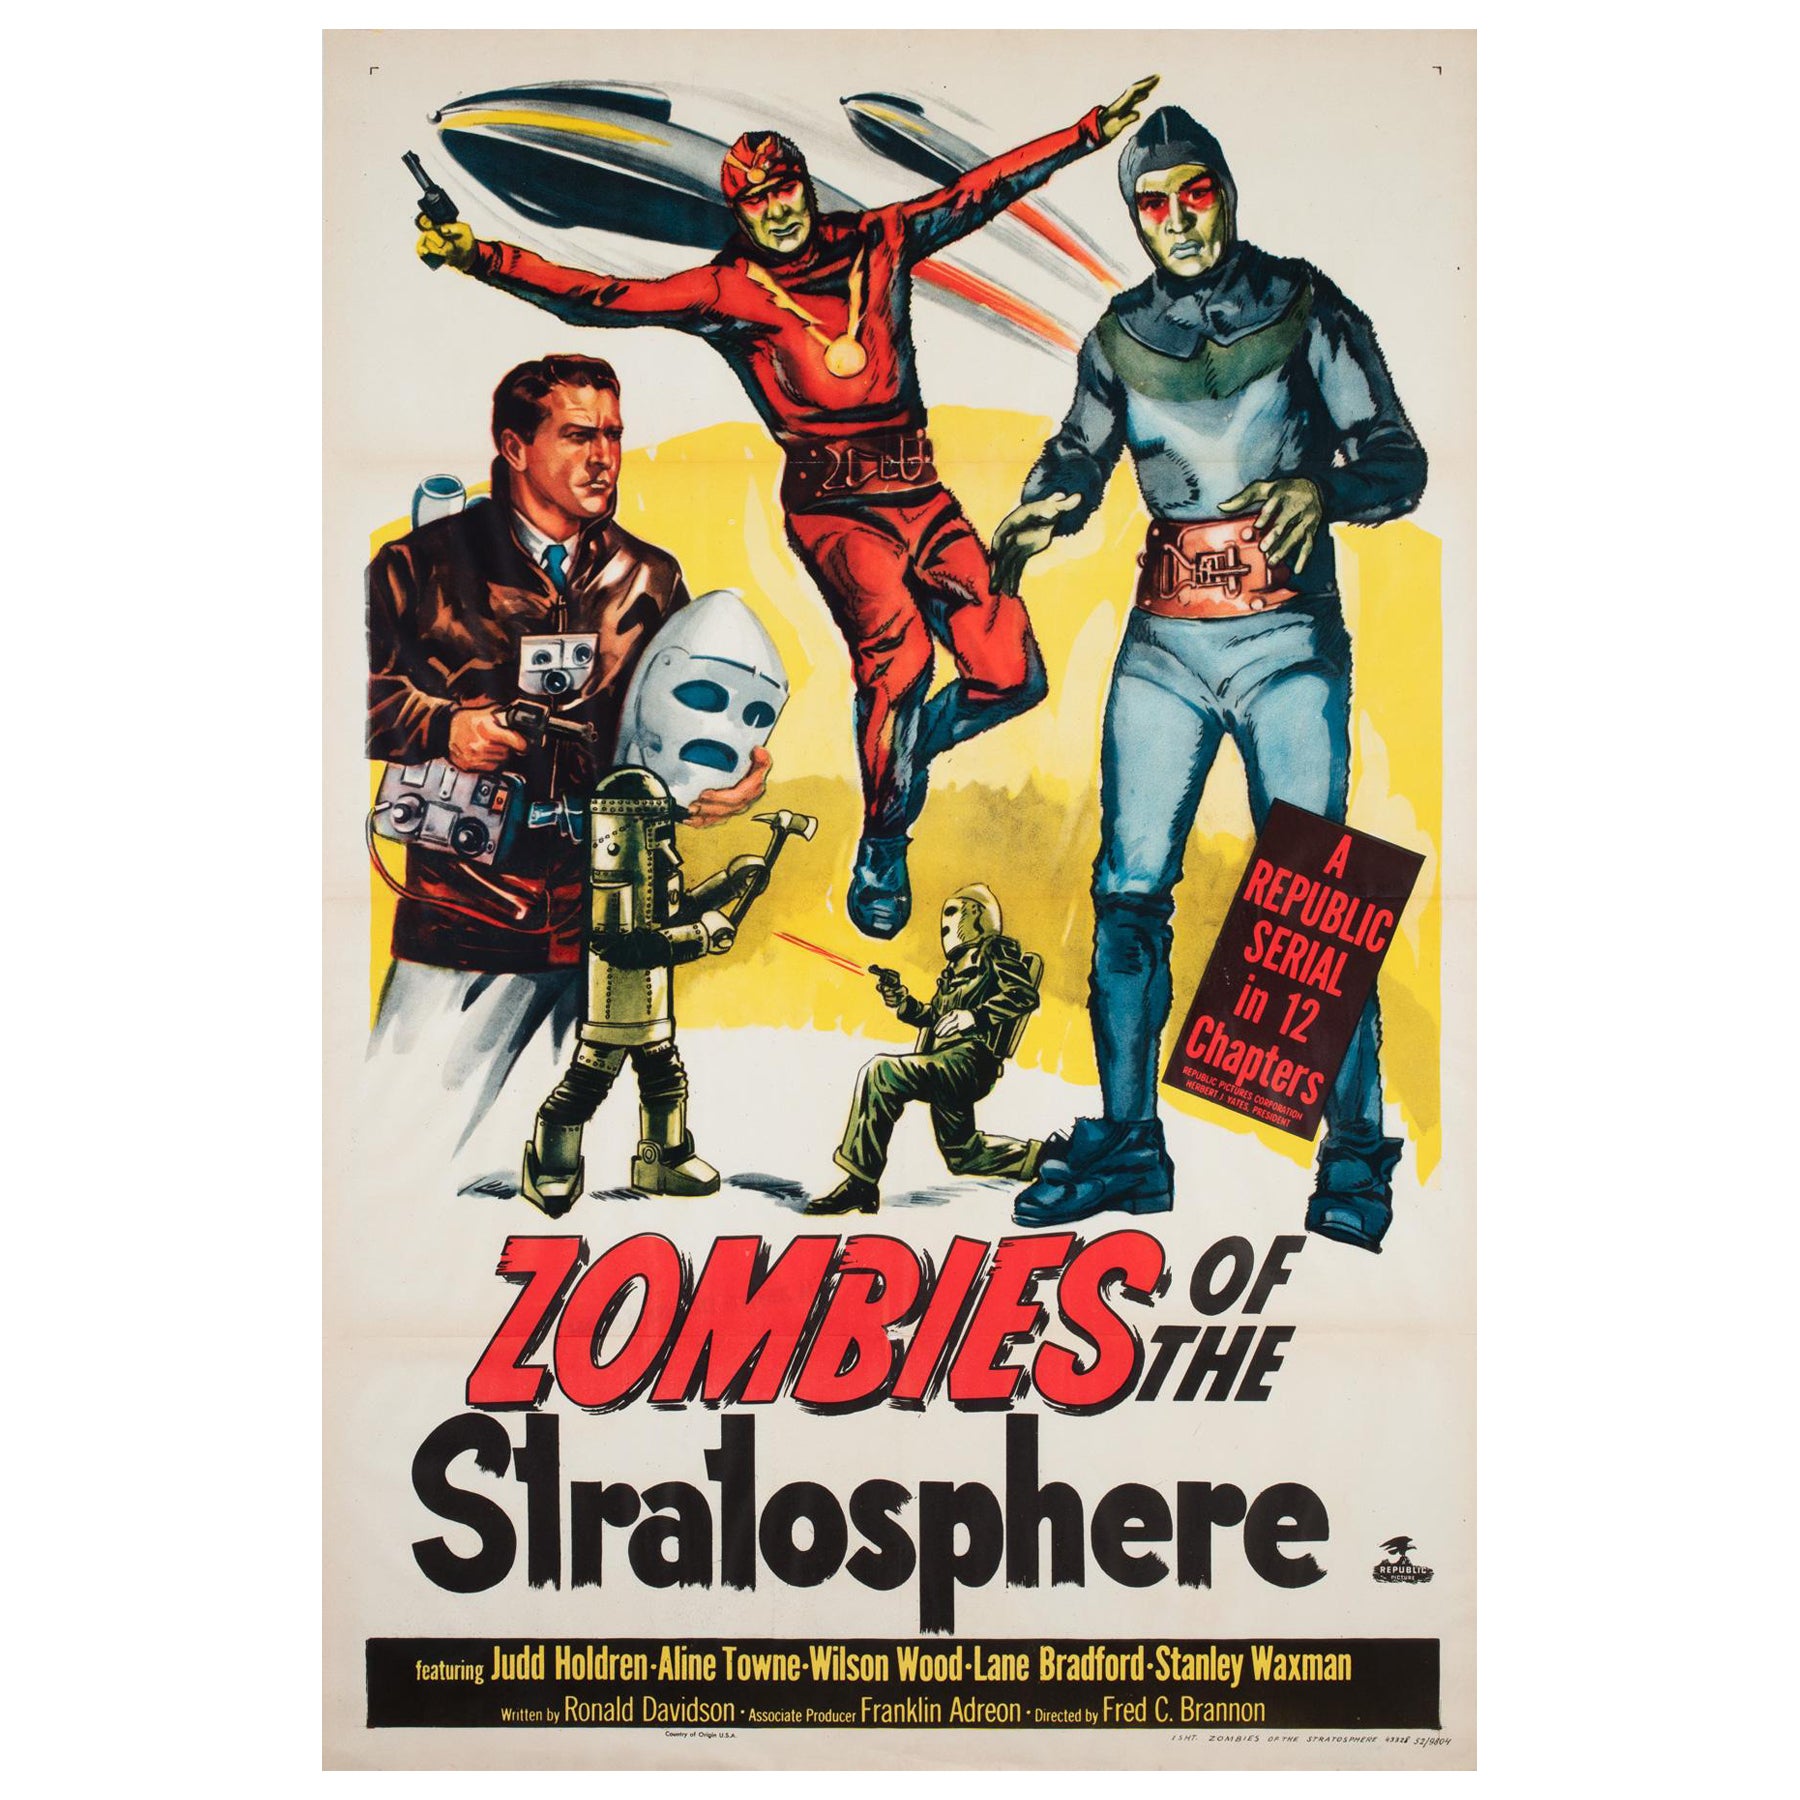 "Zombies of the Stratosphere" US Film Movie Poster, 1952 For Sale